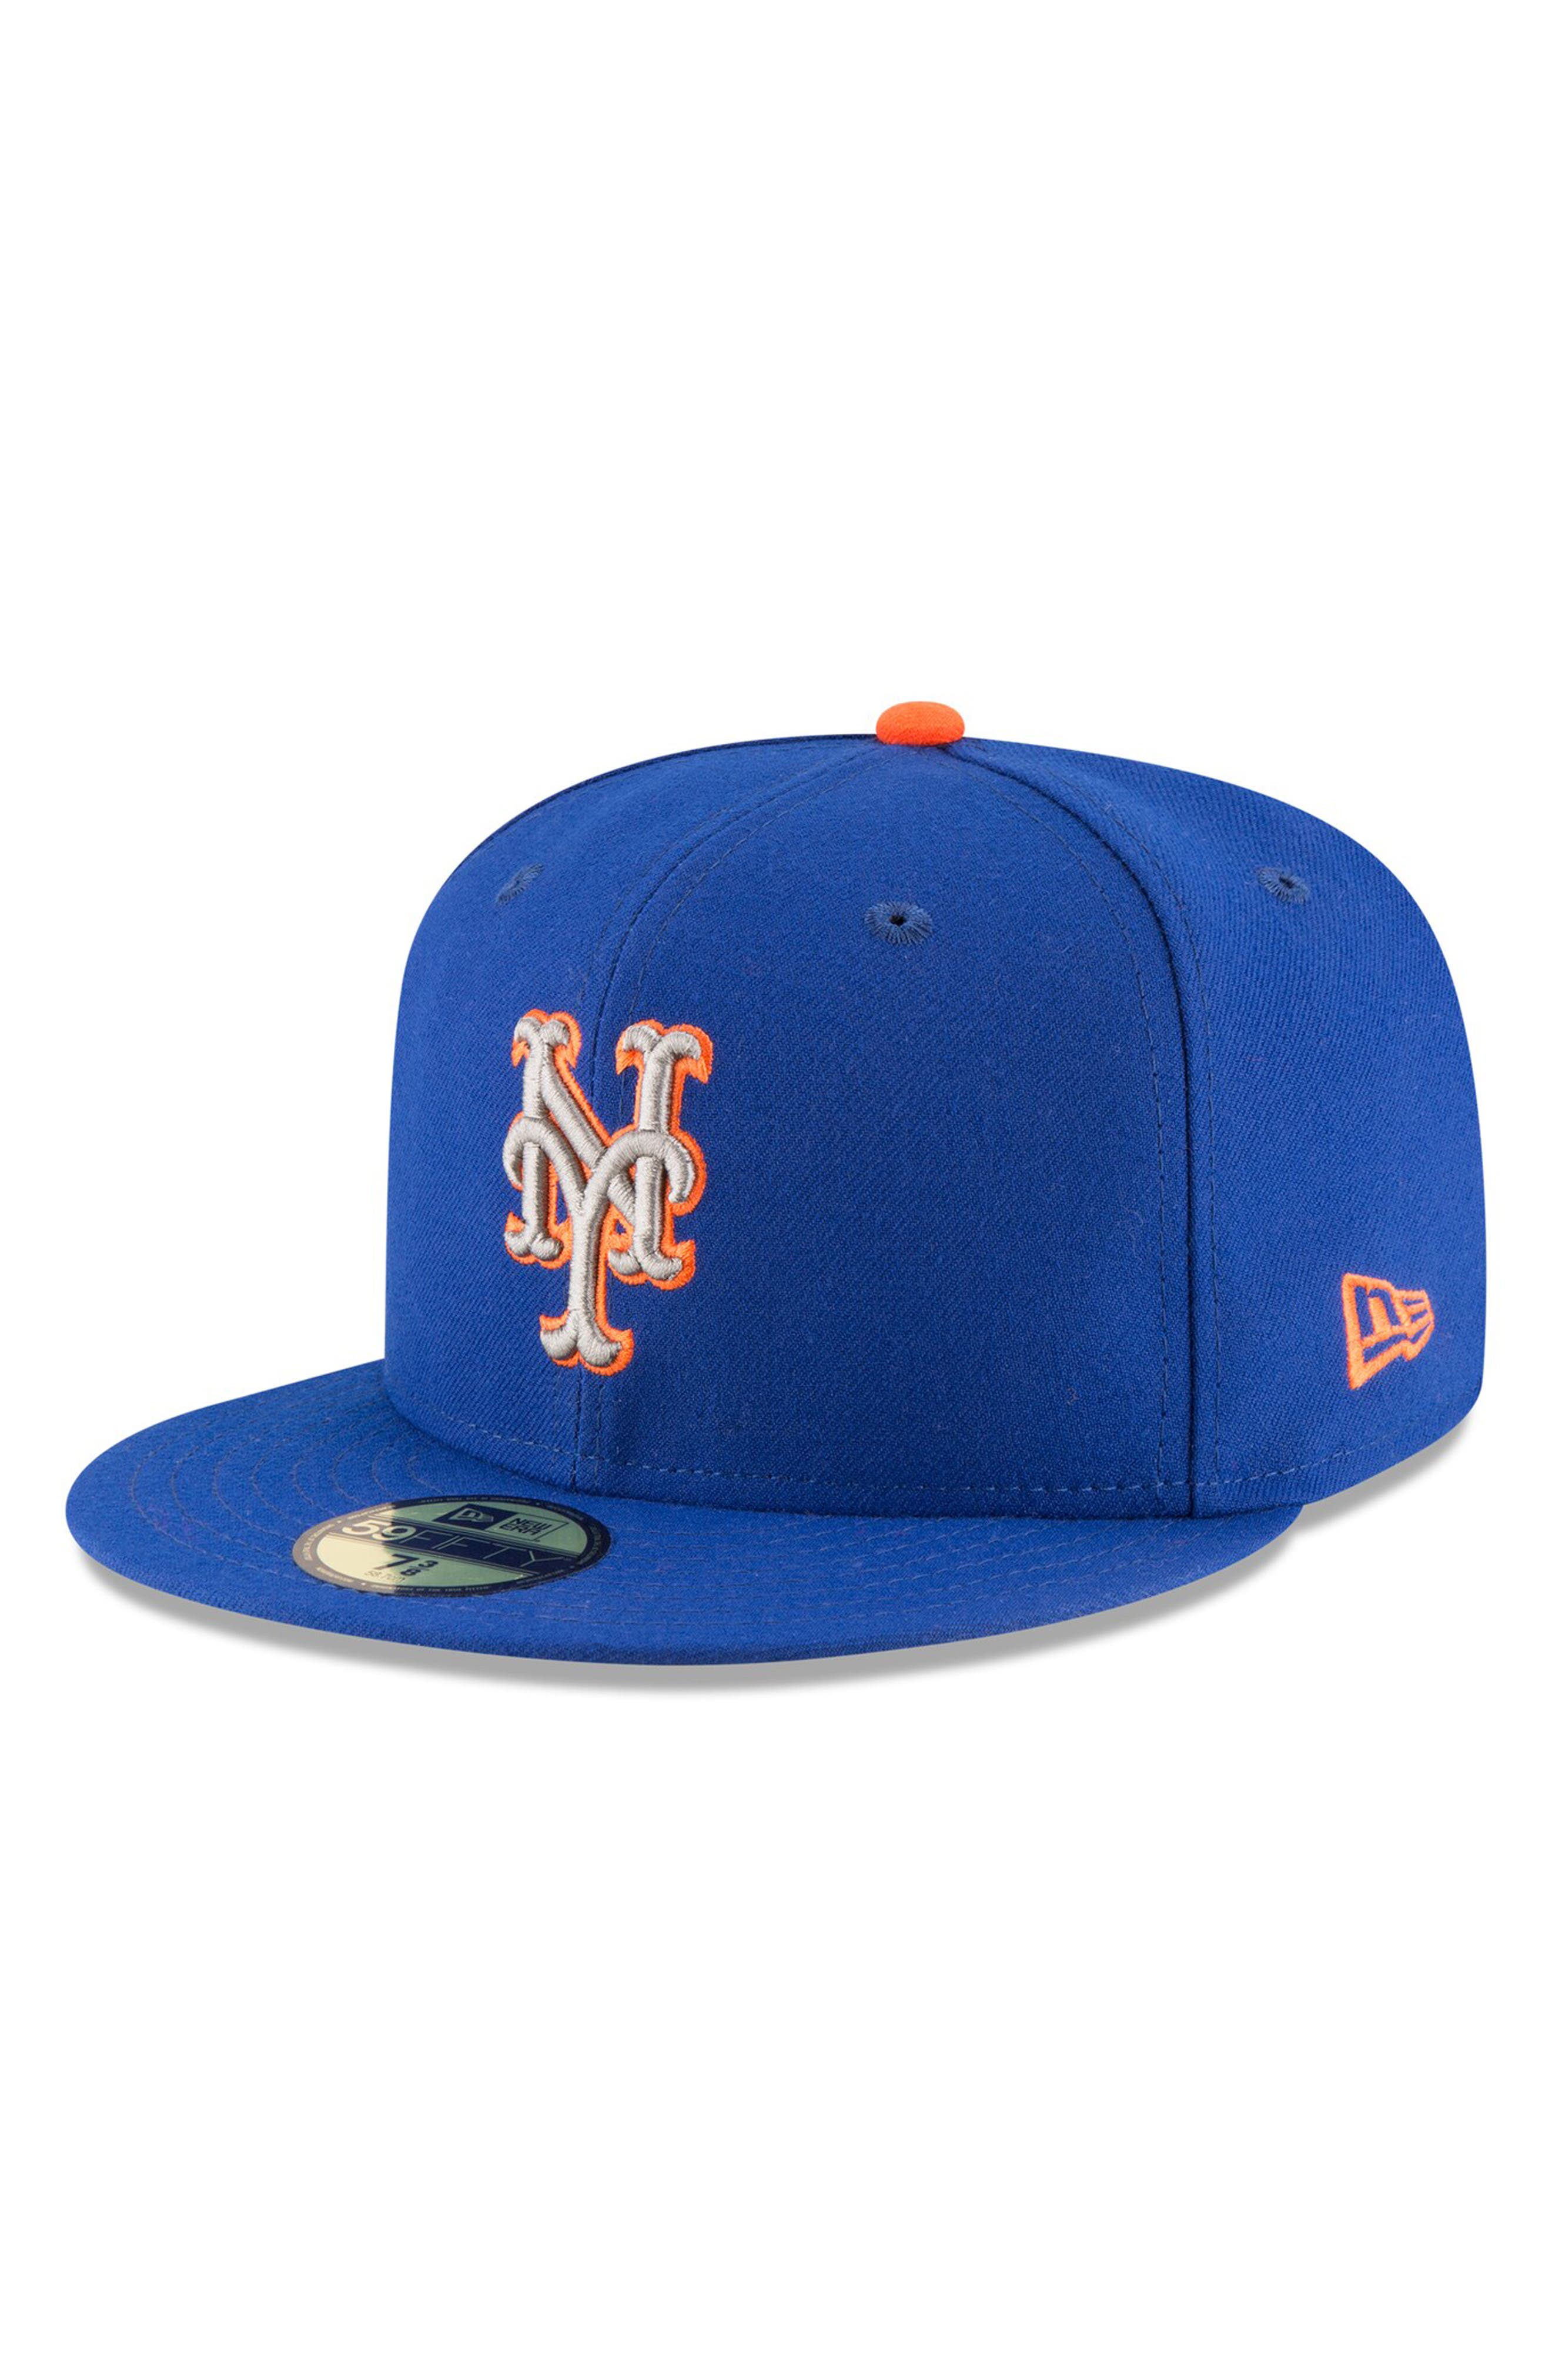 New Era 59Fifty Cap AUTHENTIC New York Mets royal 